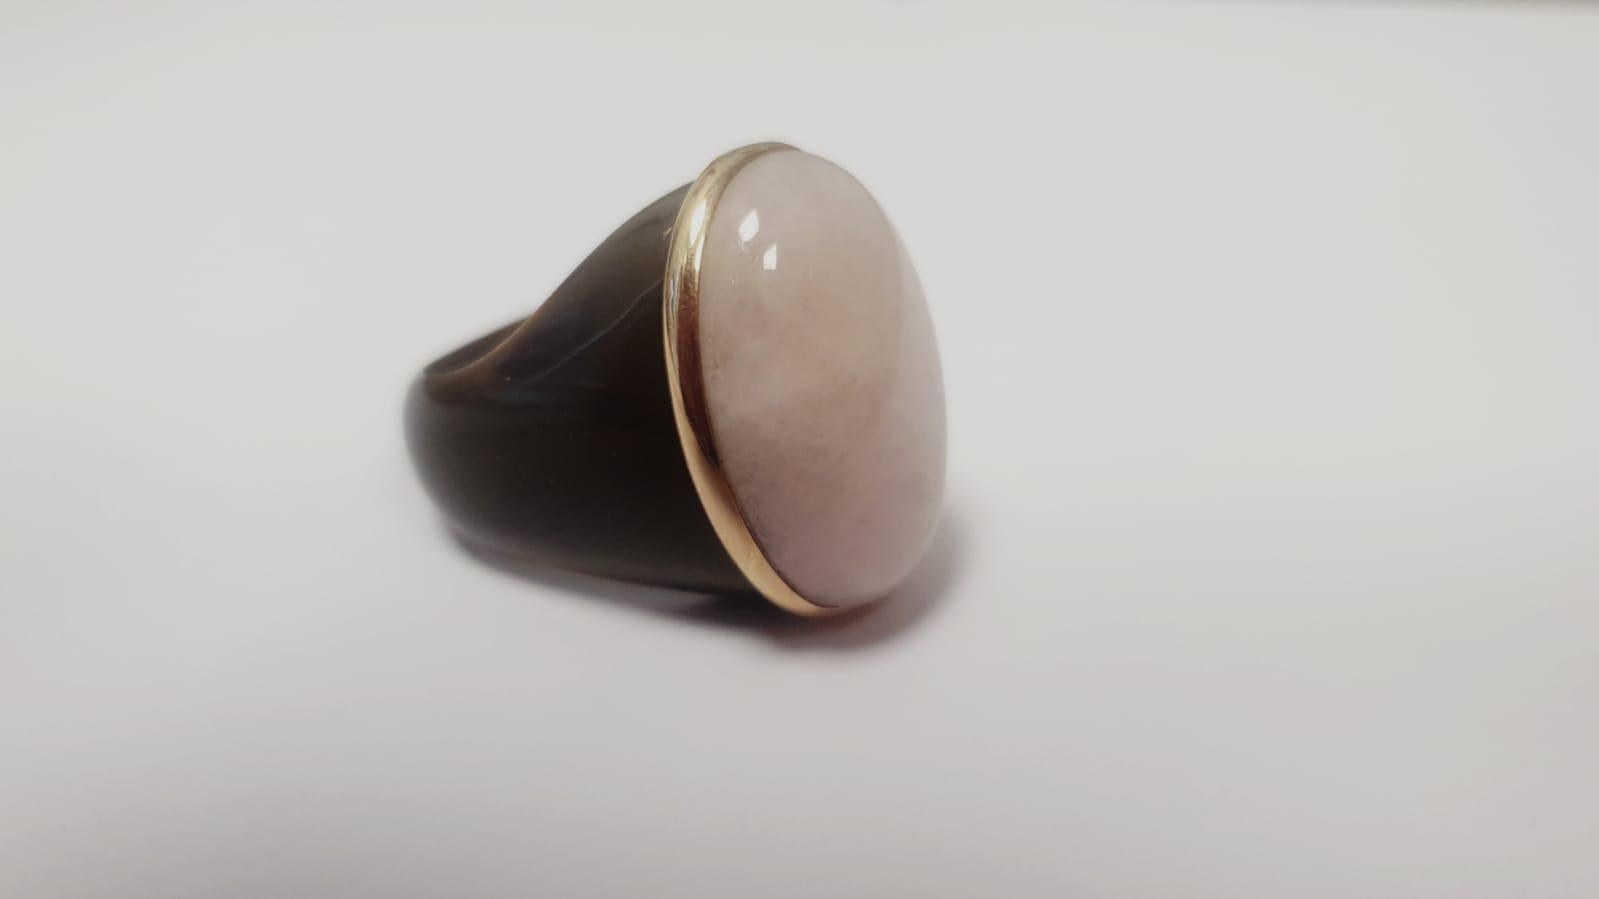 Elegant ring in brown bakelite, 18kt pink gold and morganite cabochon. 
Pink Gold g. 1,7
Oval Morganite cabochon size 25x18  mm
Size 17 (ita) 8 (usa)  57 (fra) 

